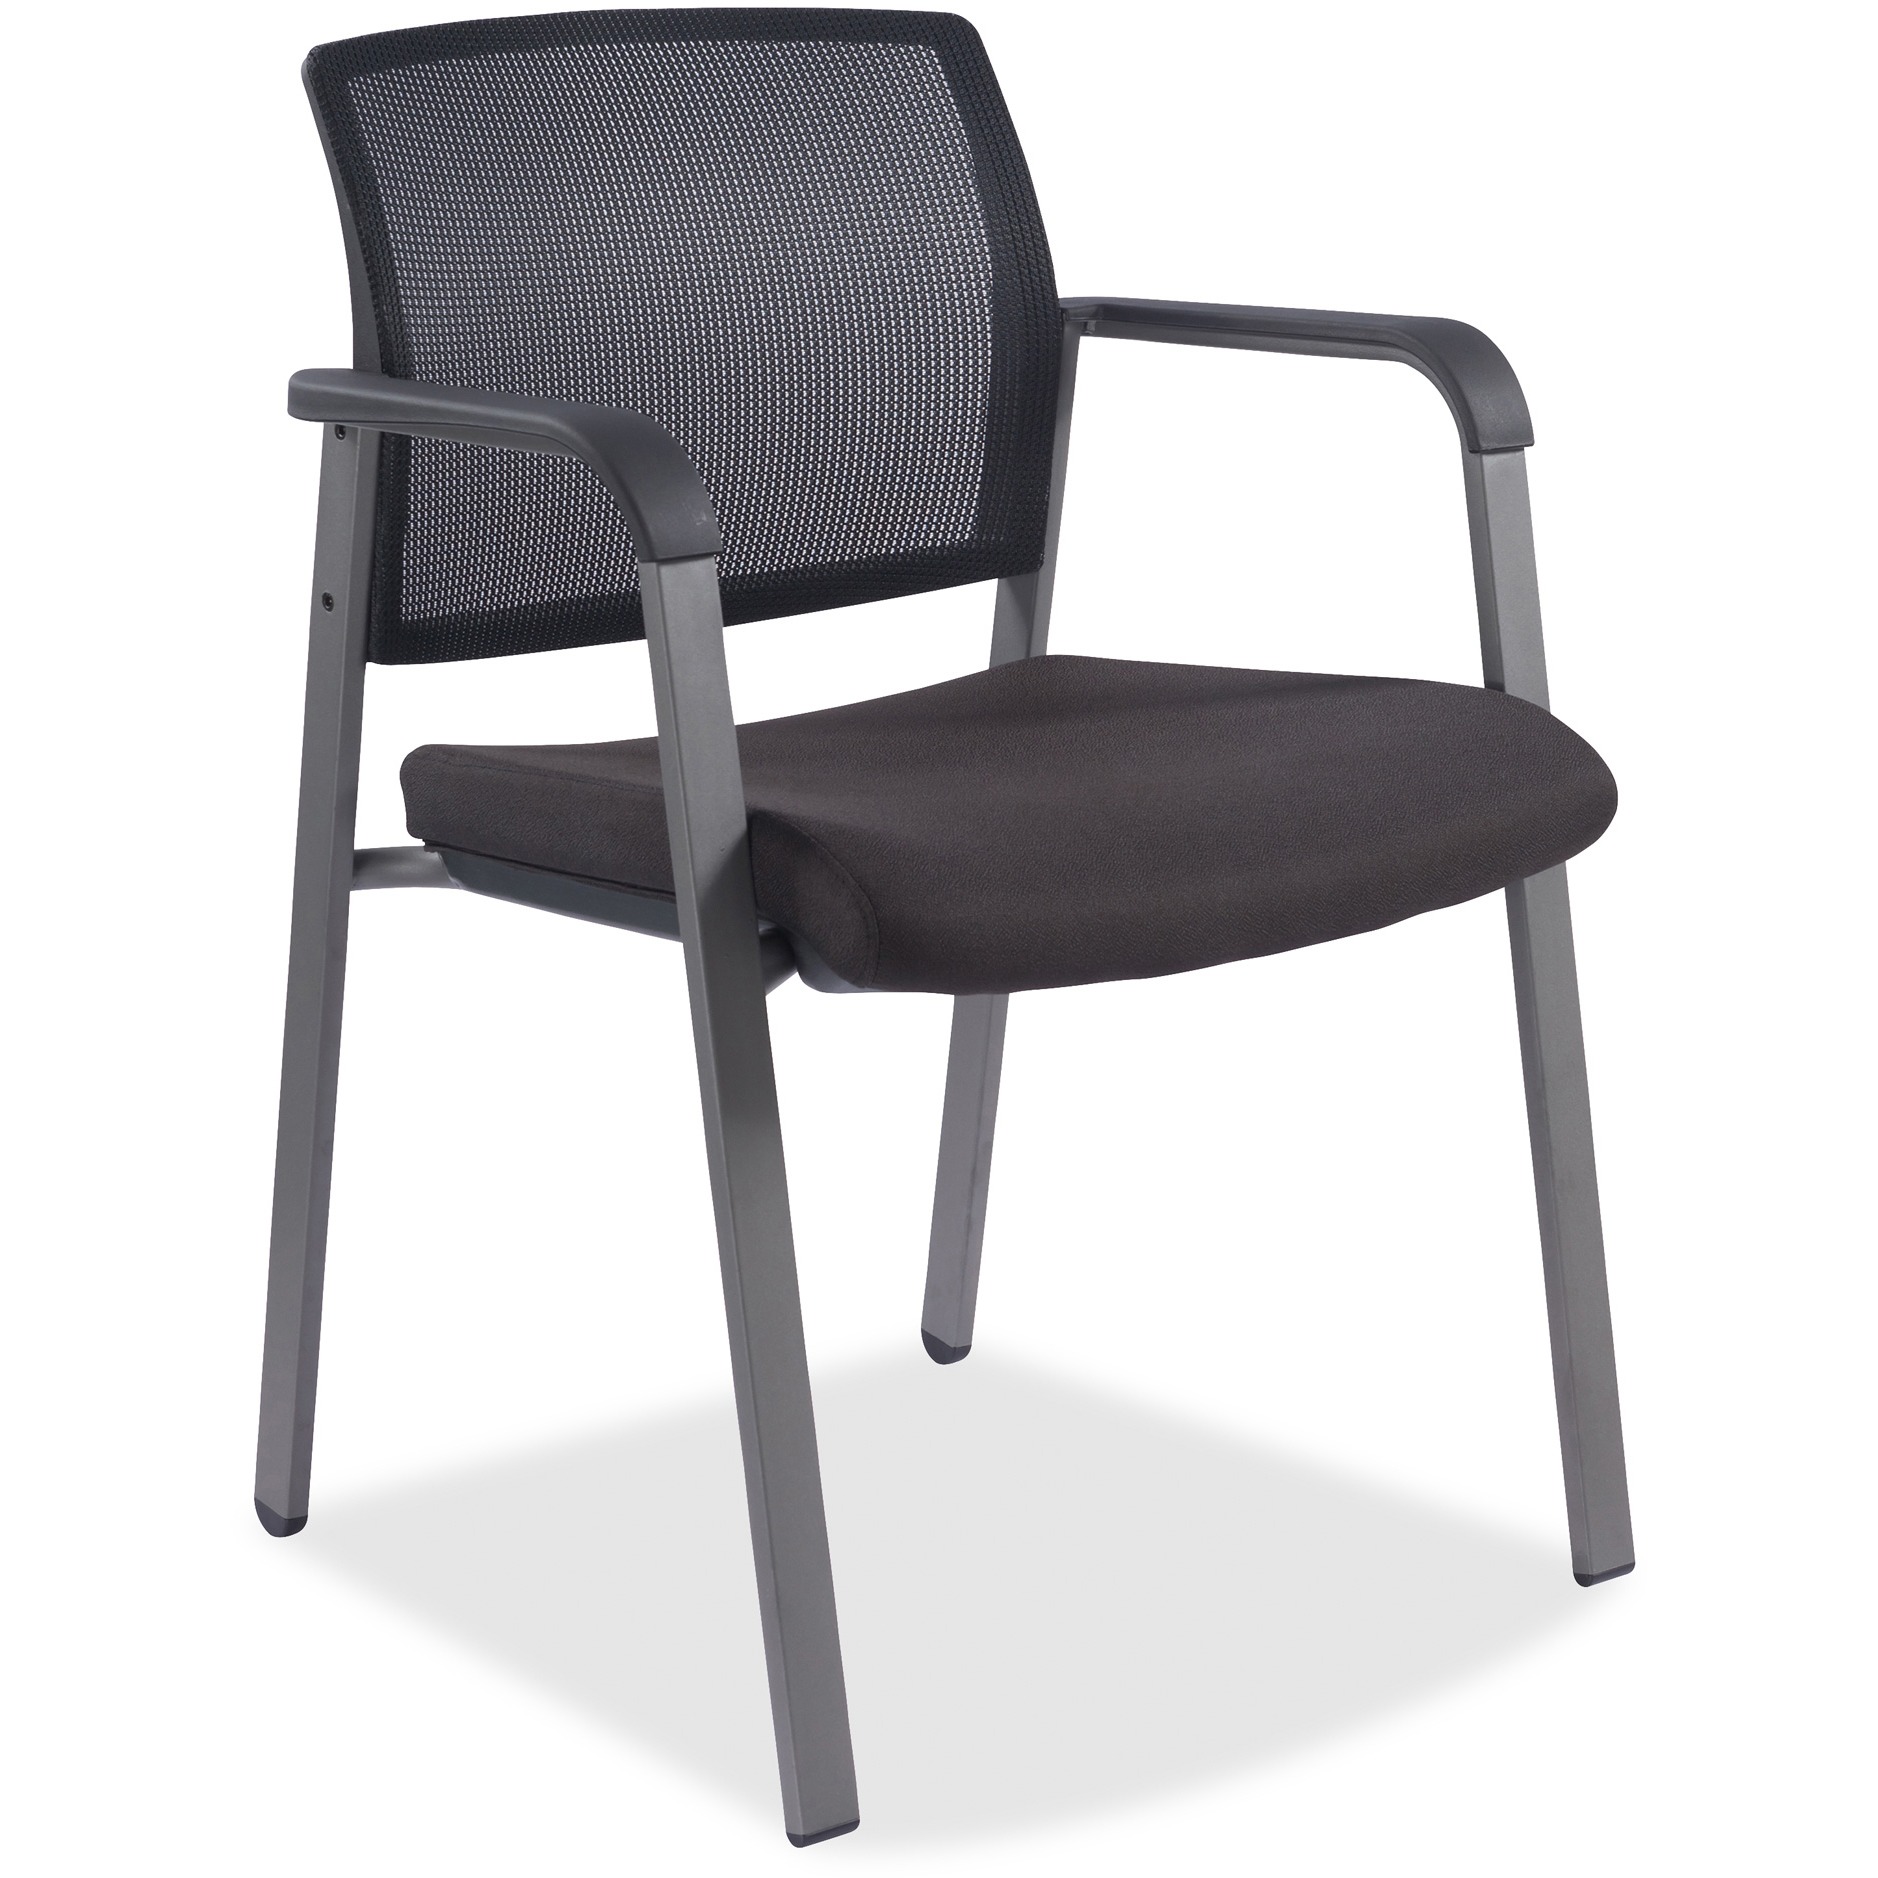 Lorell Guest Reception Waiting Room Chair, Mesh Back, Black - image 1 of 2